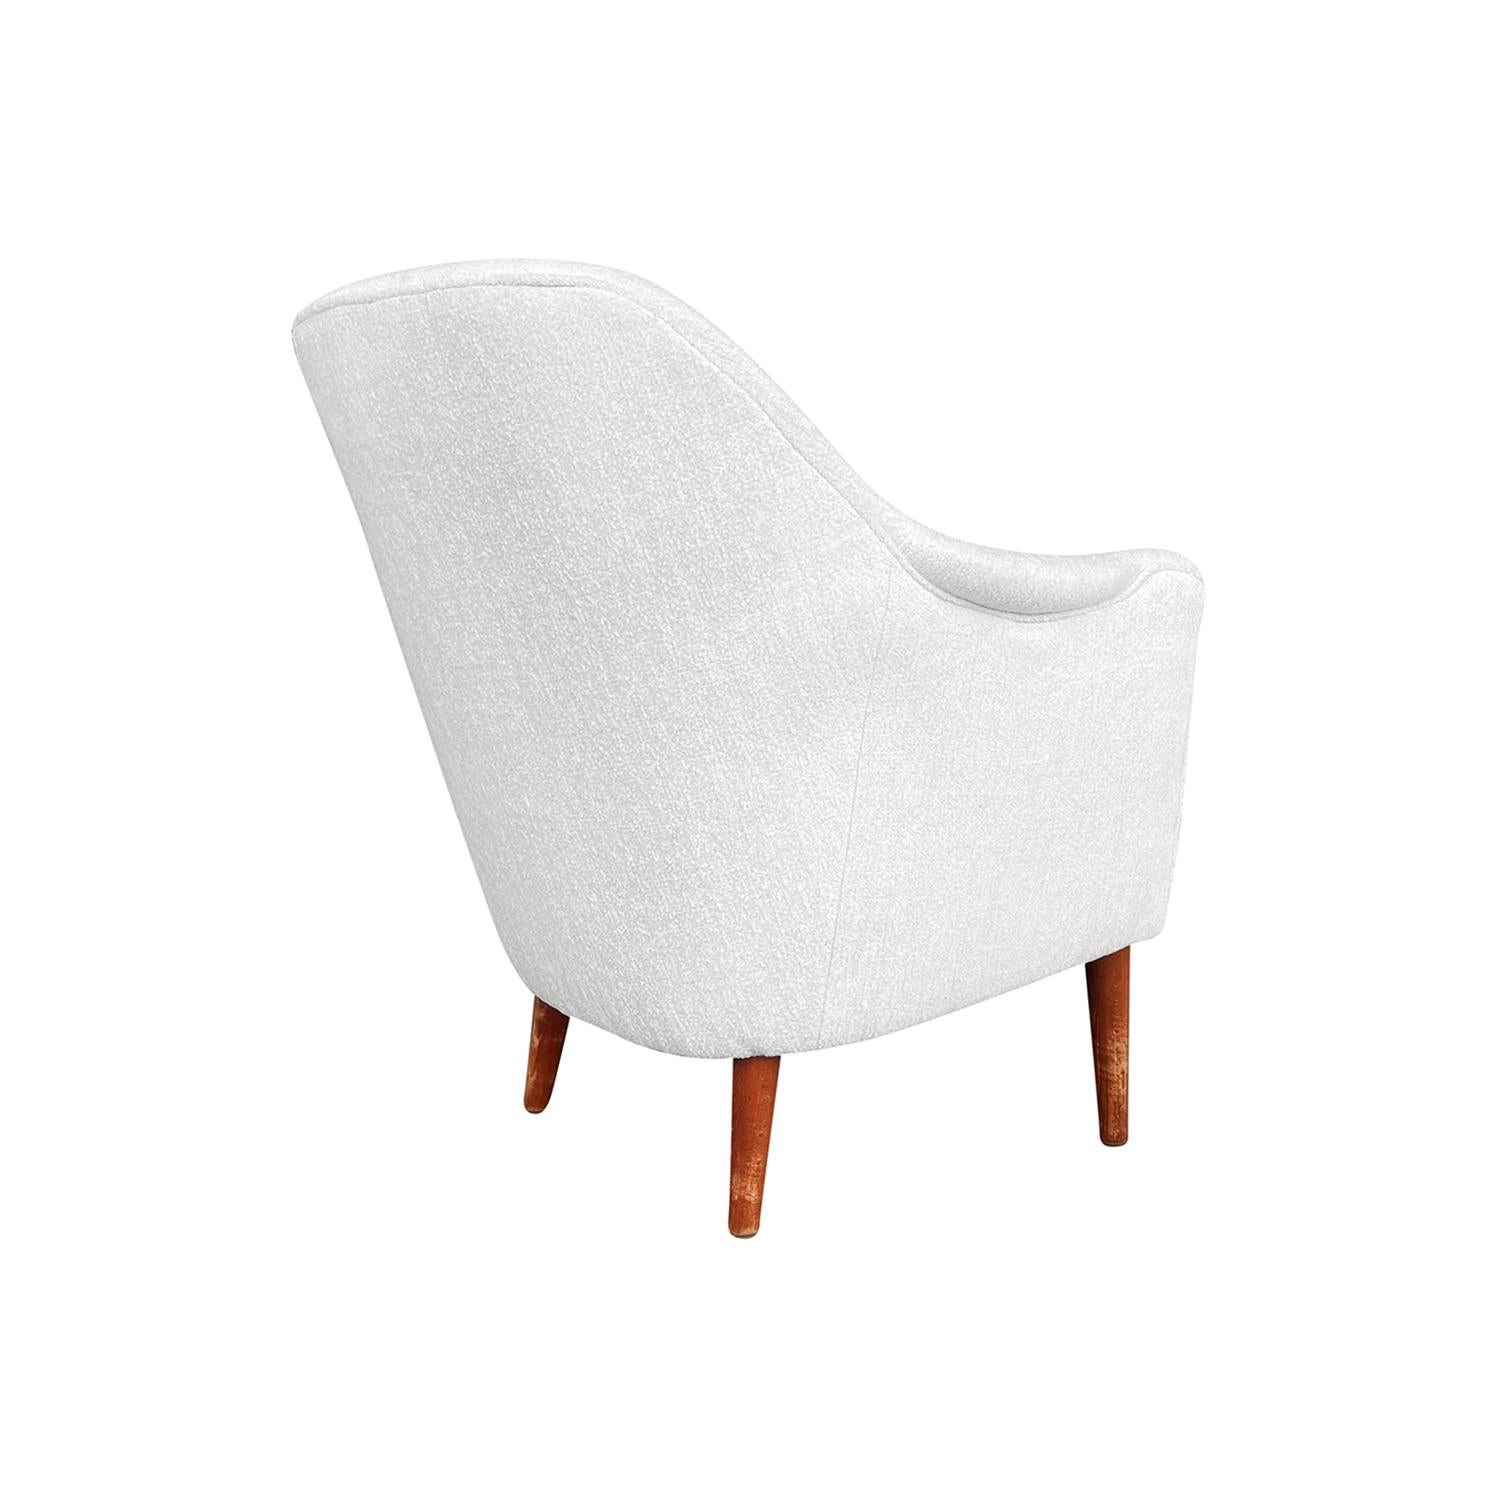 Hand-Carved 20th Century White Swedish Samspel Easy Chair, Birch Armchair by Carl Malmsten For Sale